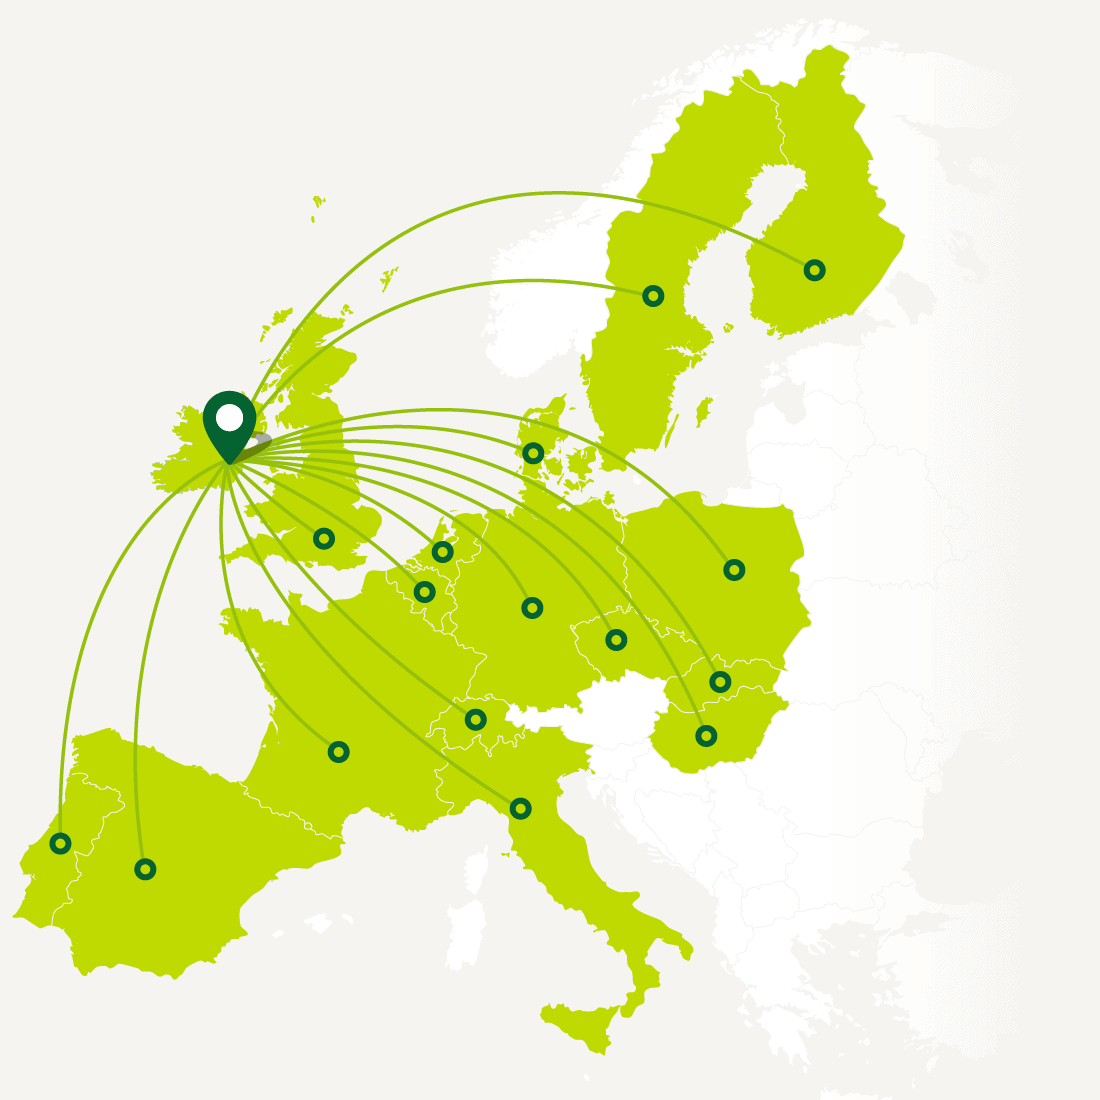 Map displaying the Dawn Farms European distribution network from Ireland.